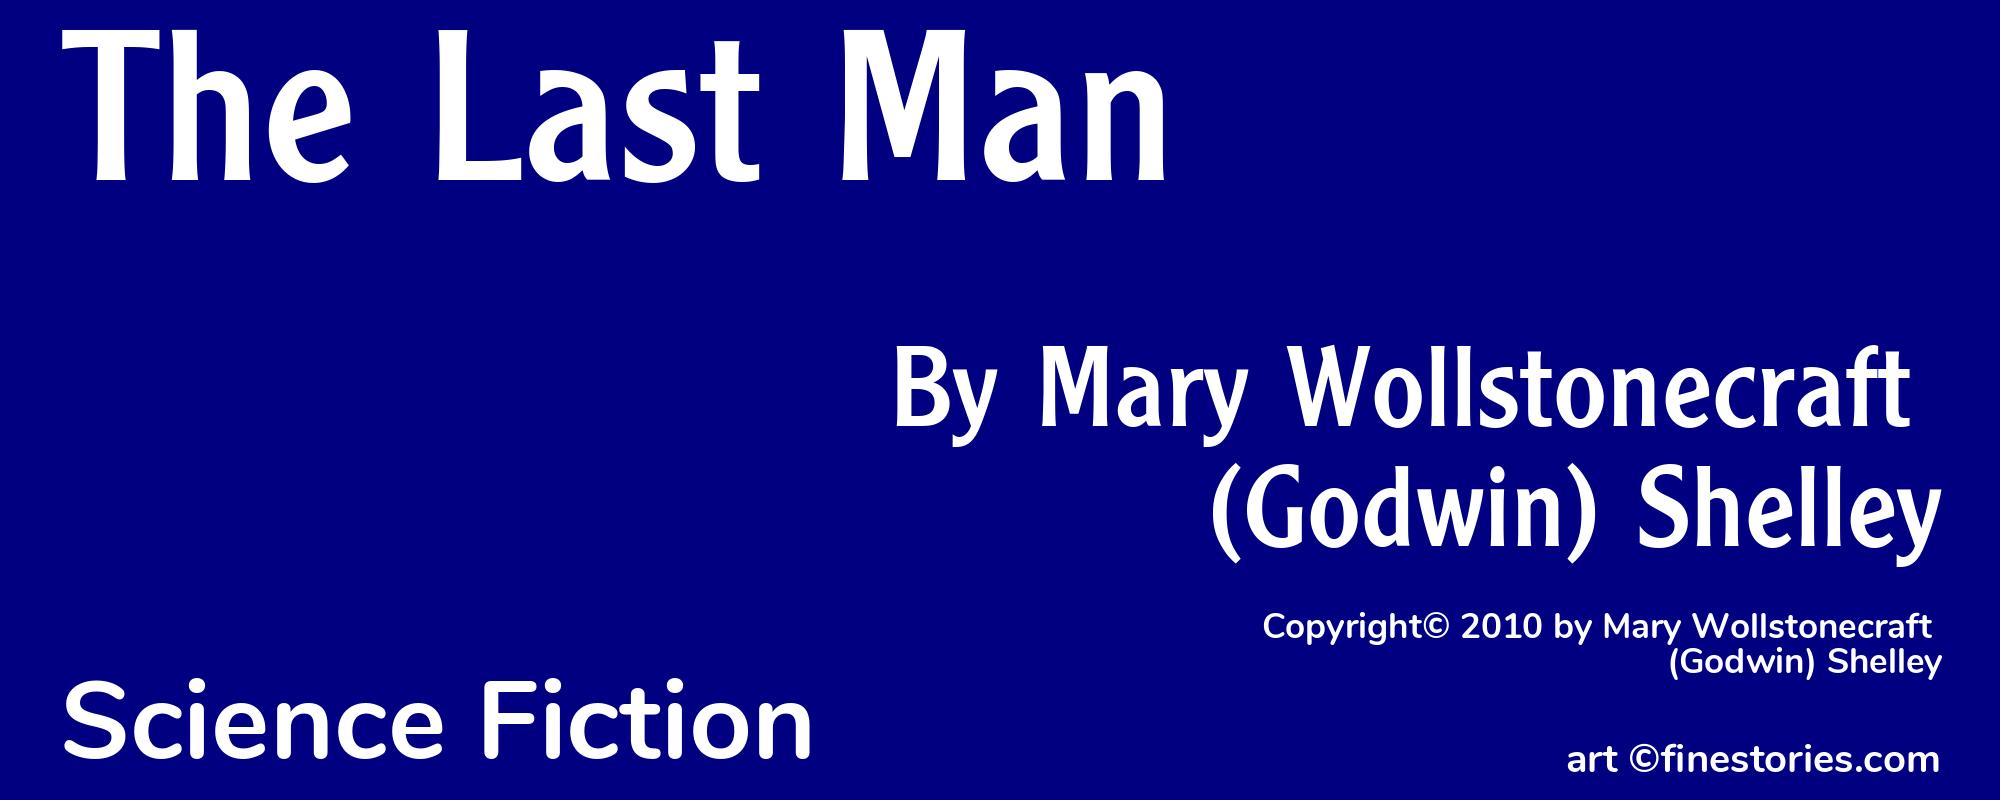 The Last Man - Cover